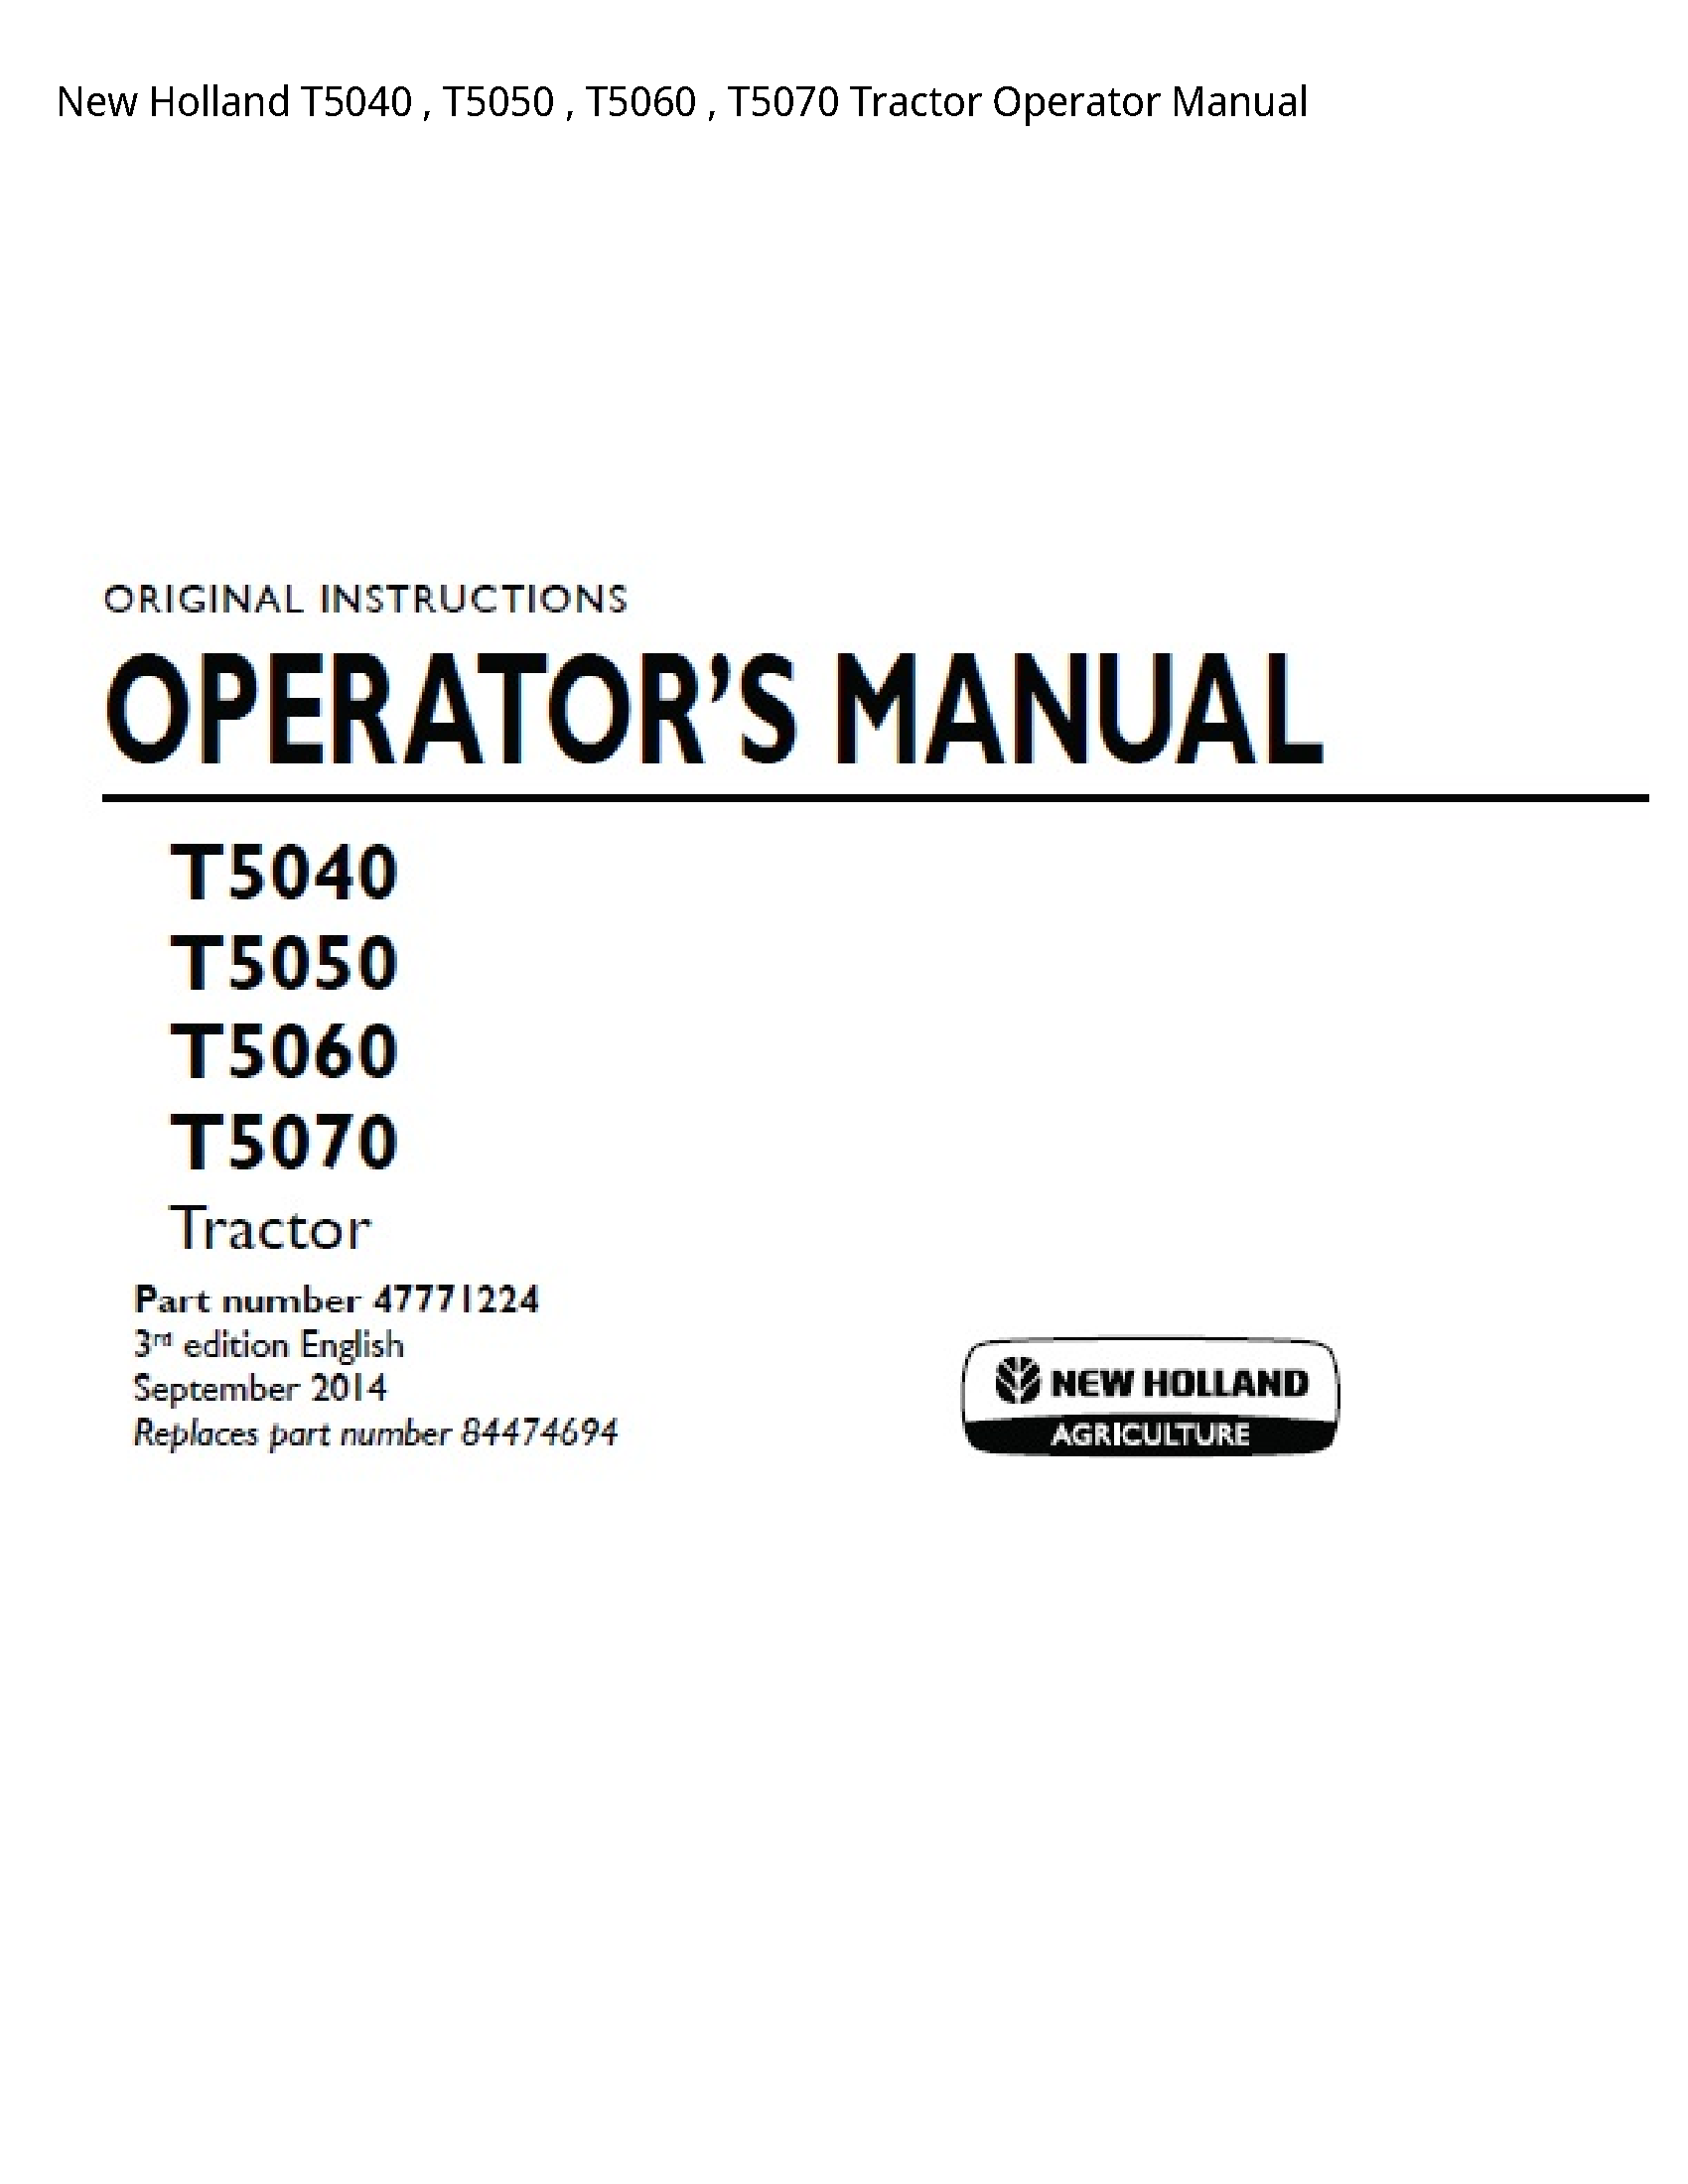 New Holland T5040 Tractor Operator manual